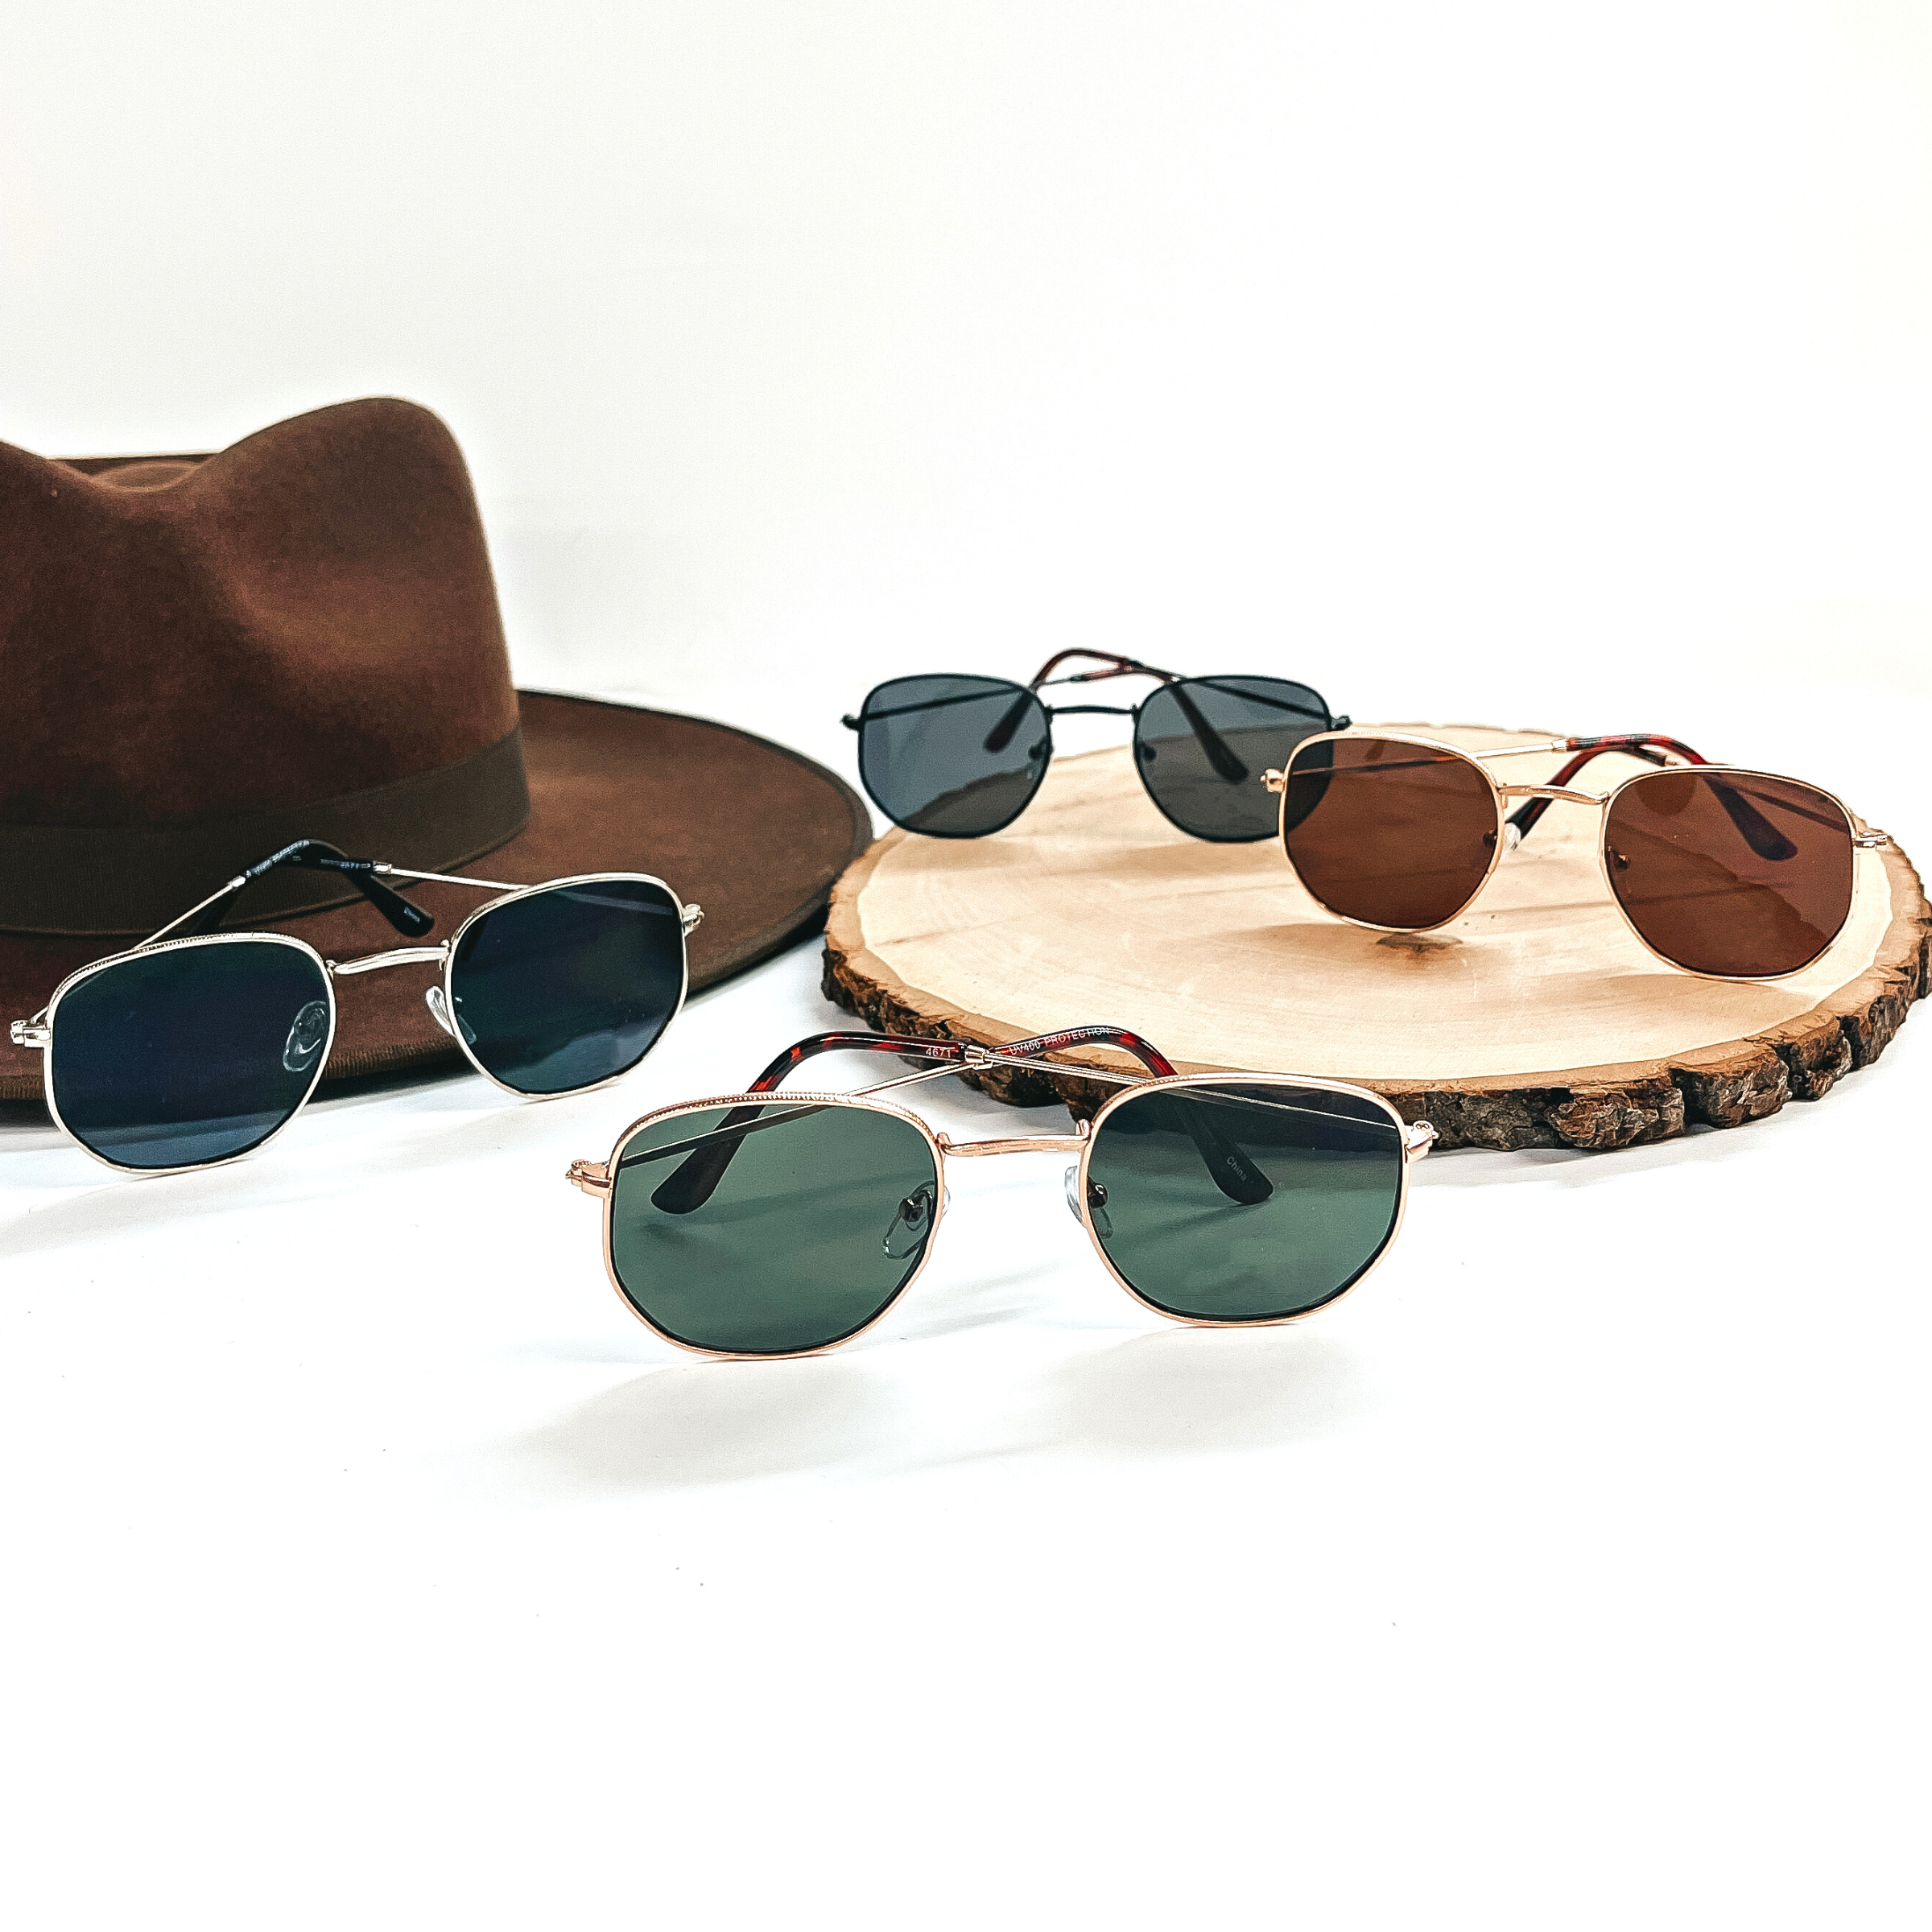 These are four pairs of sunglasses in silver, black, gold and rose gold frame/outline. These sunglasses are taken on a wooden slate, white background, and a brown felt hat  in the back as decor.